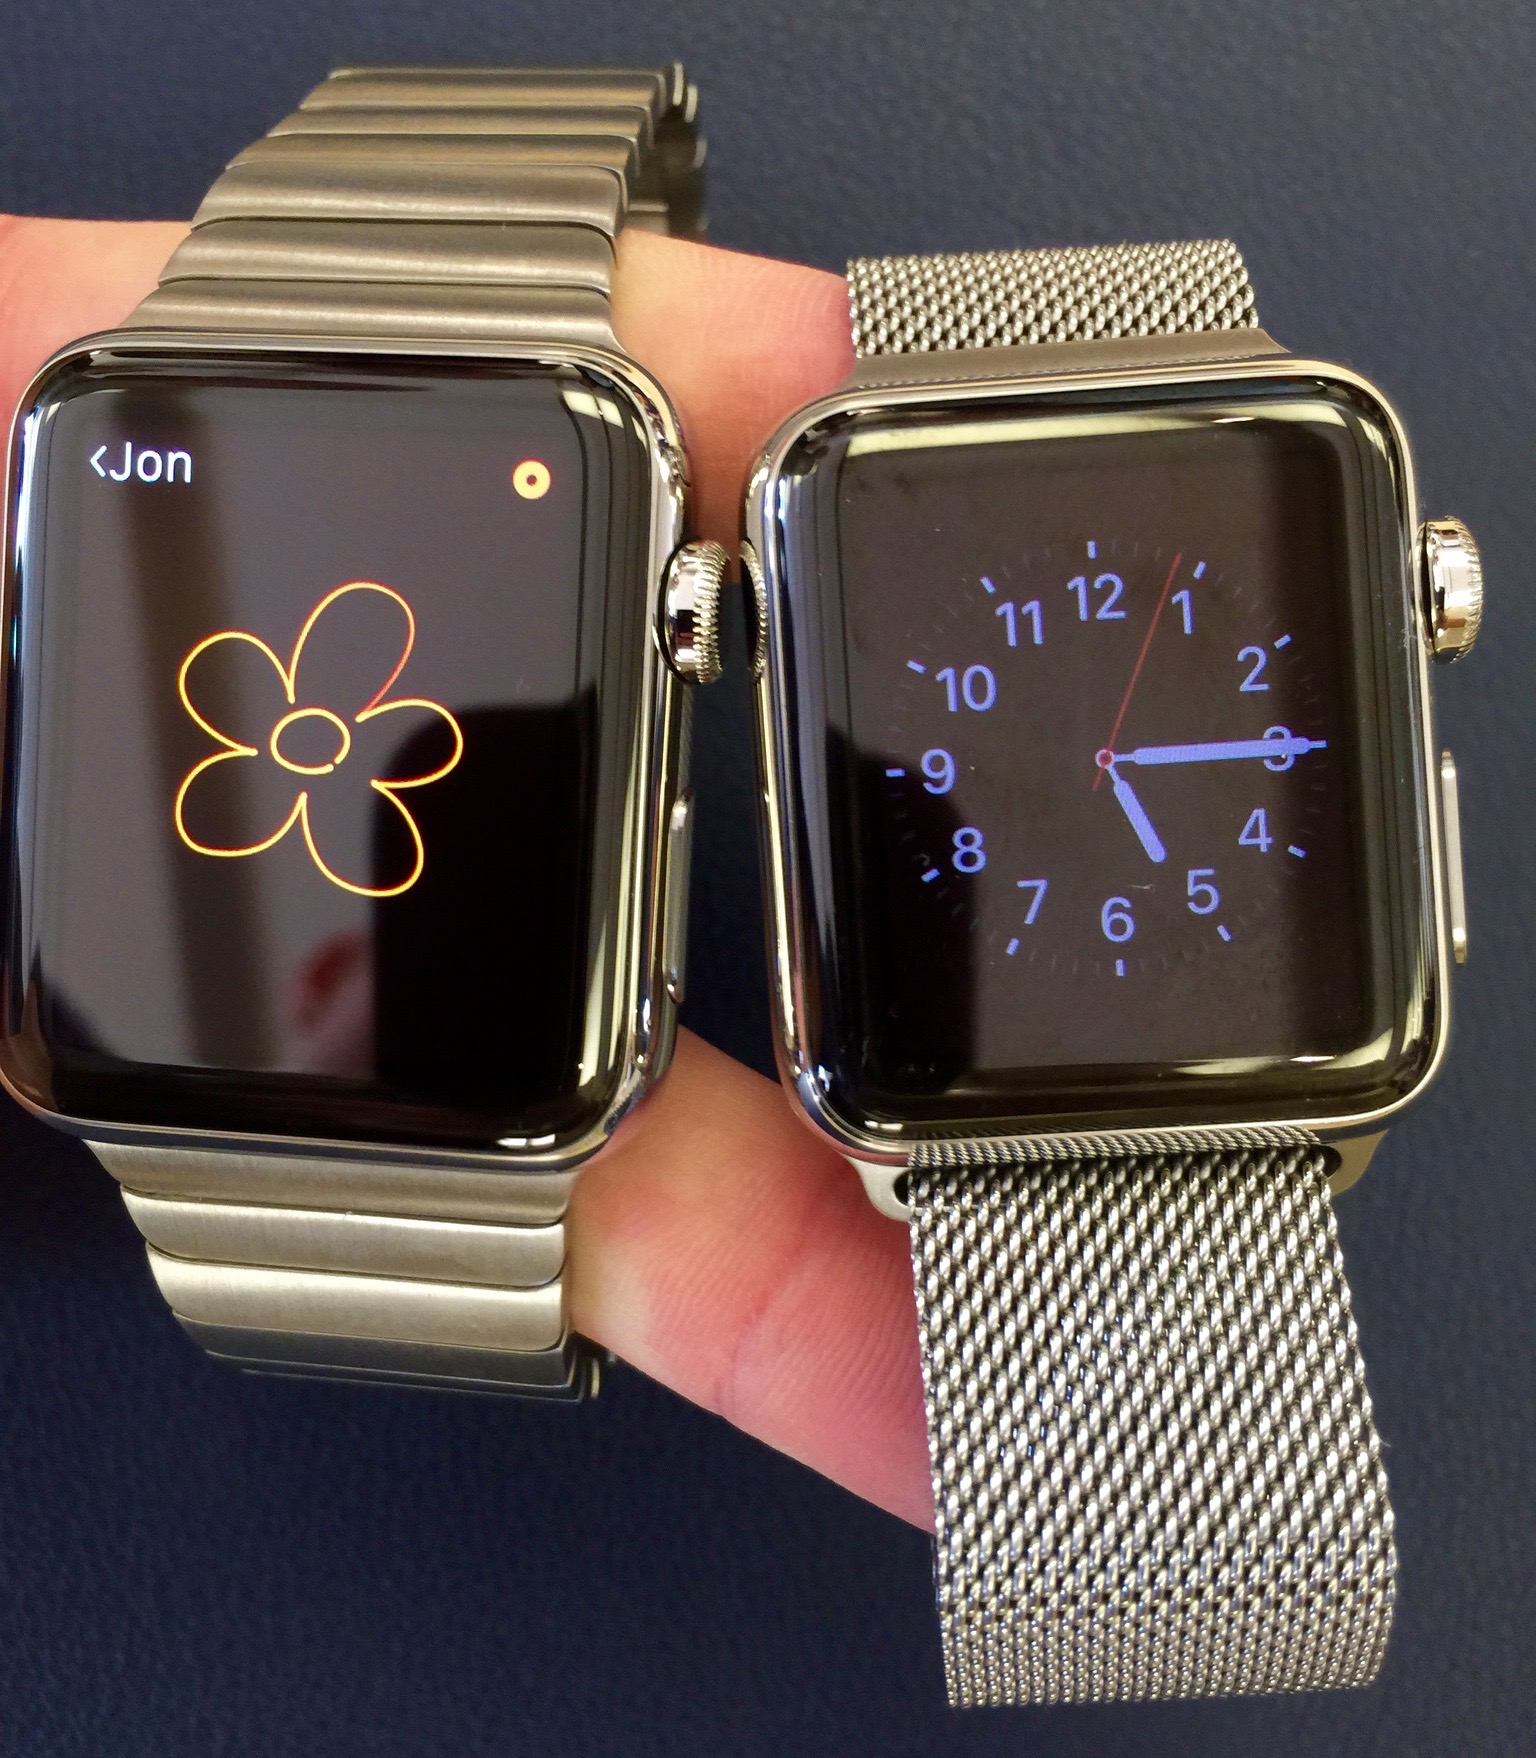 You can use Apple Watch bands like the Link Bracelet or Milanese Loop on the Apple Watch Sport.